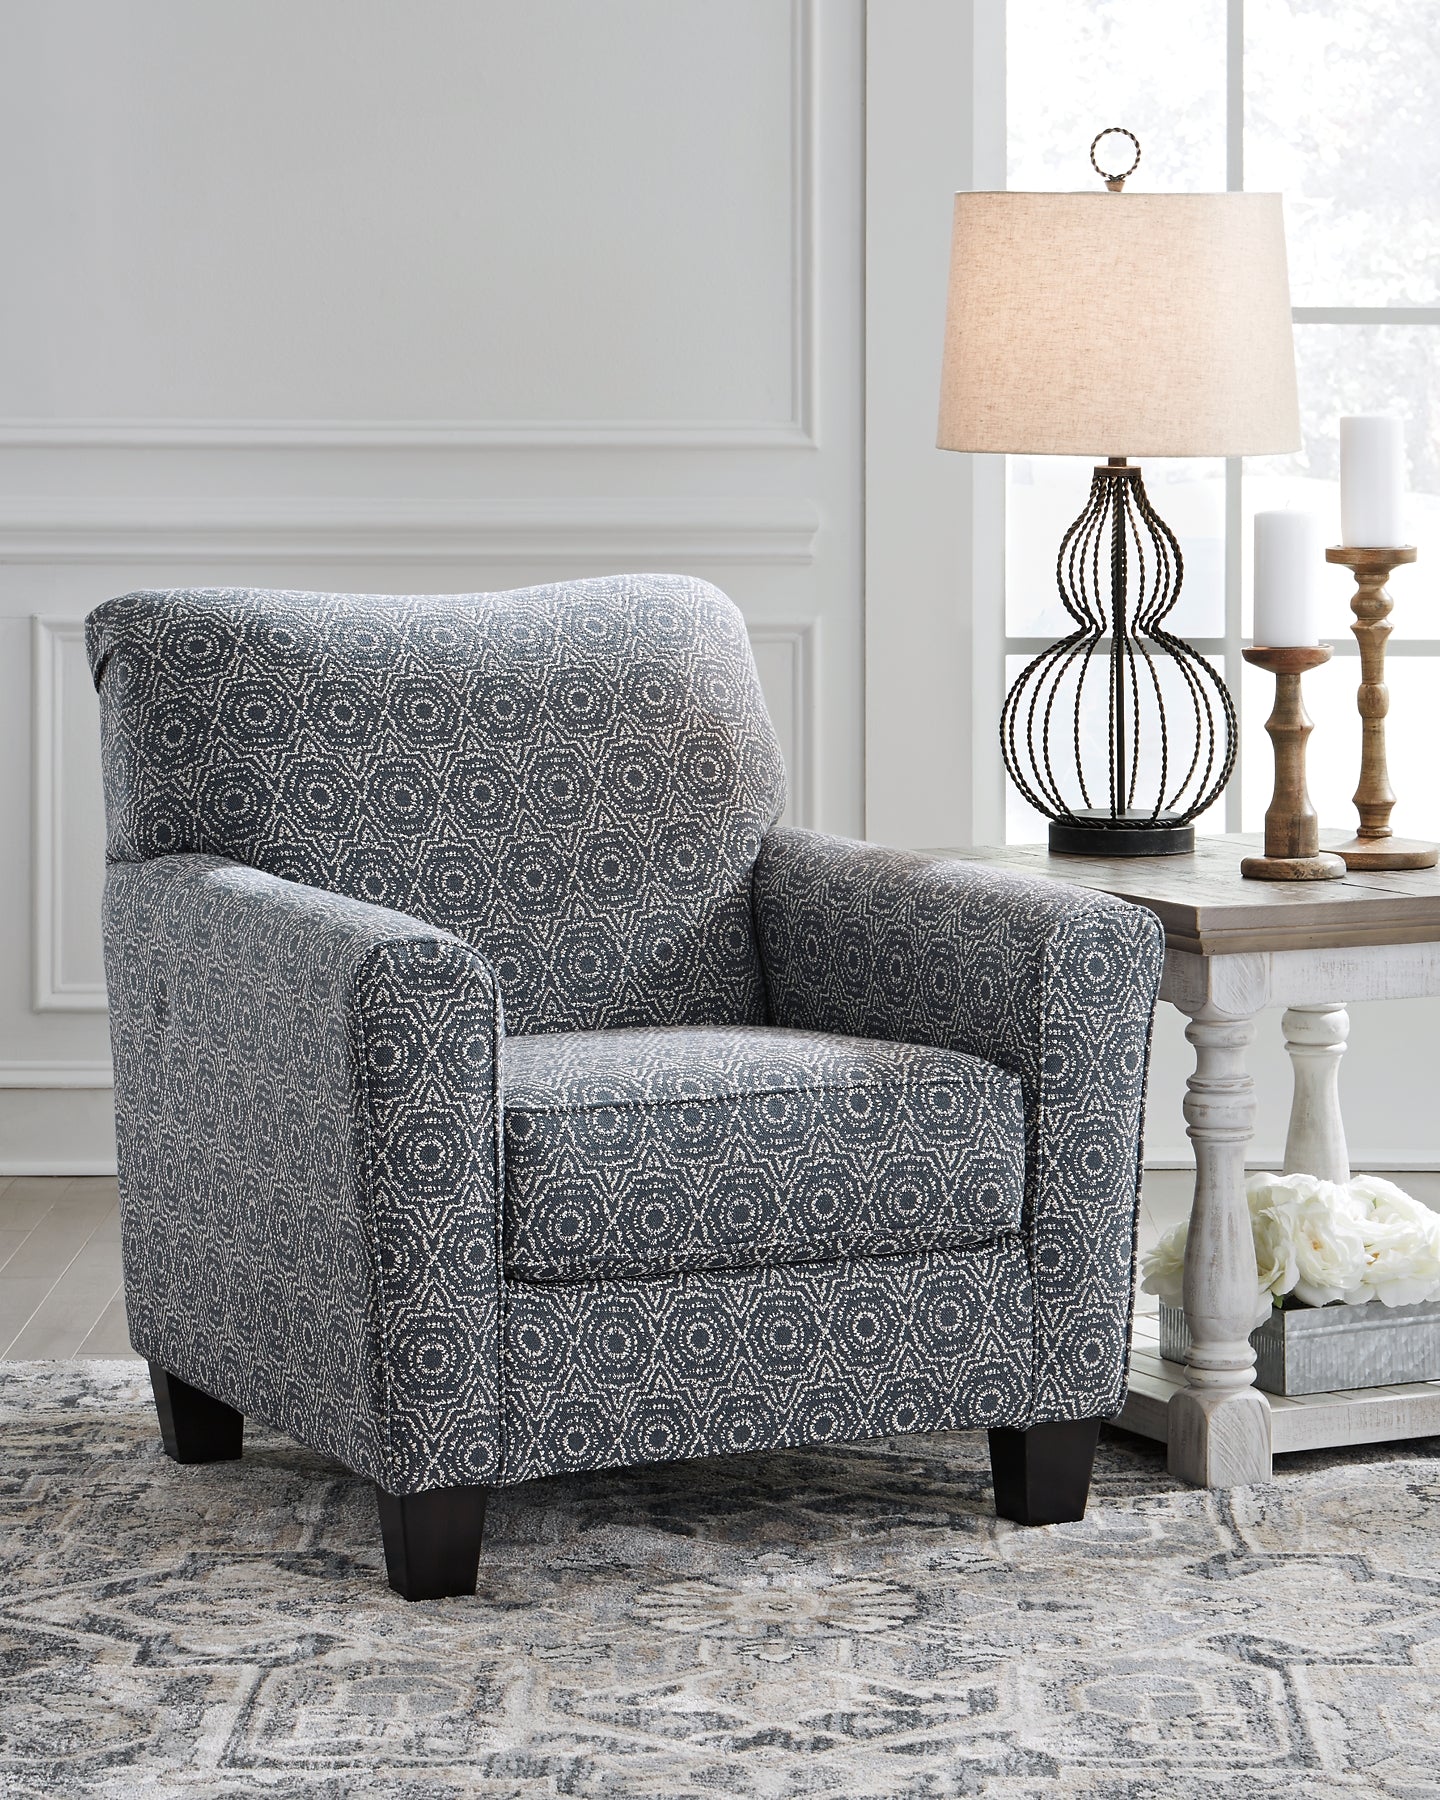 Brinsmade Accent Chair Rent Wise Rent To Own Jacksonville, Florida